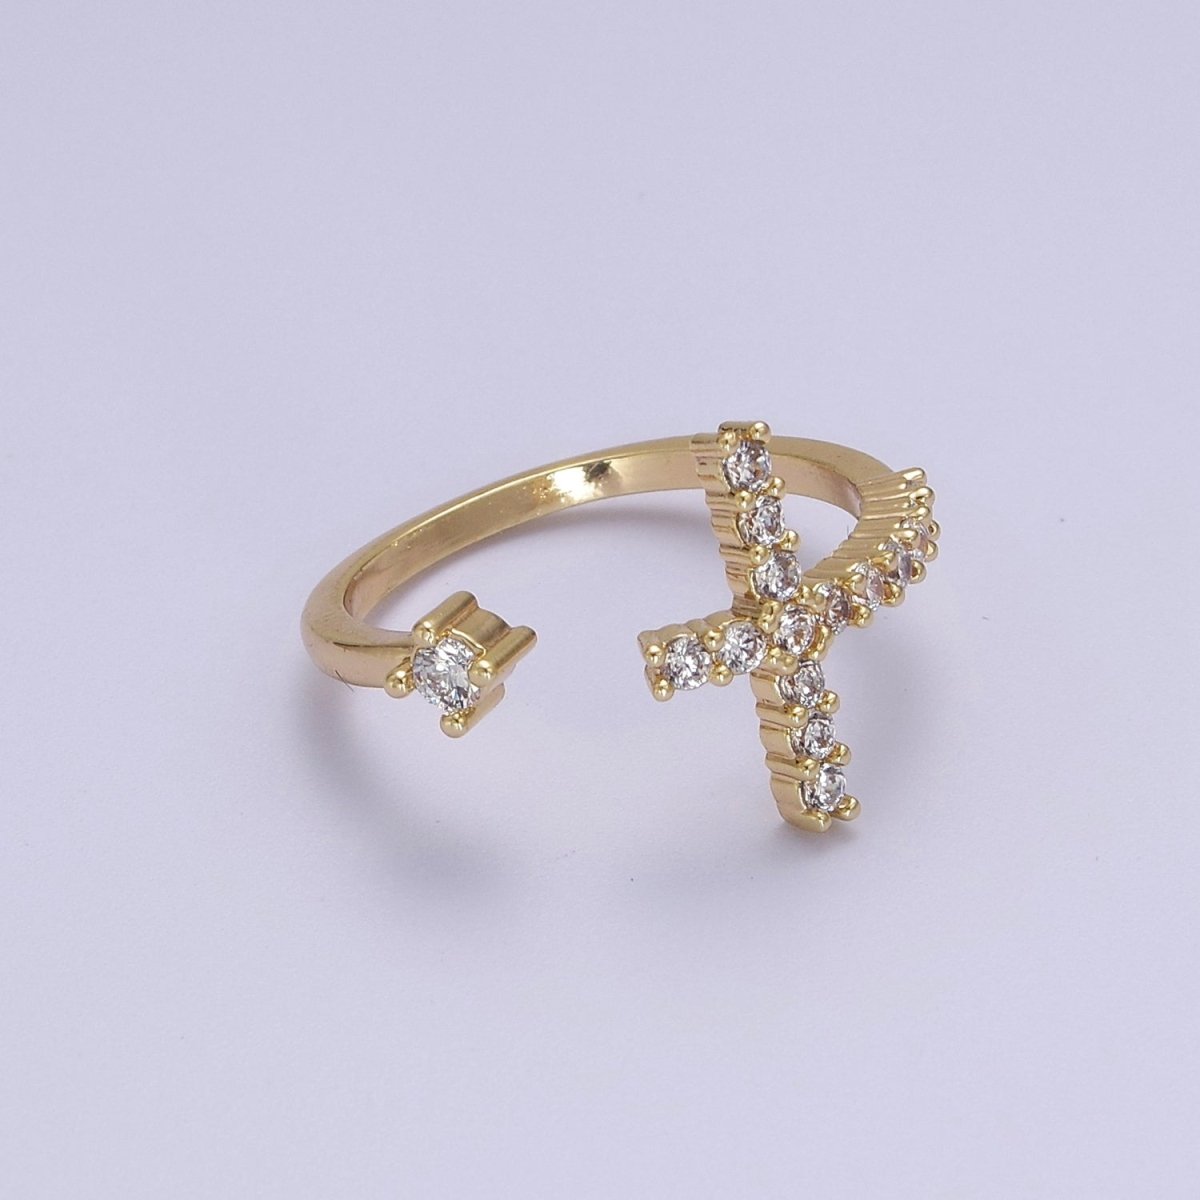 OS Minimalist Cross Rings Clear CZ Stacking Jewelry Gold Filled Band ring Adjustable S-527 - DLUXCA